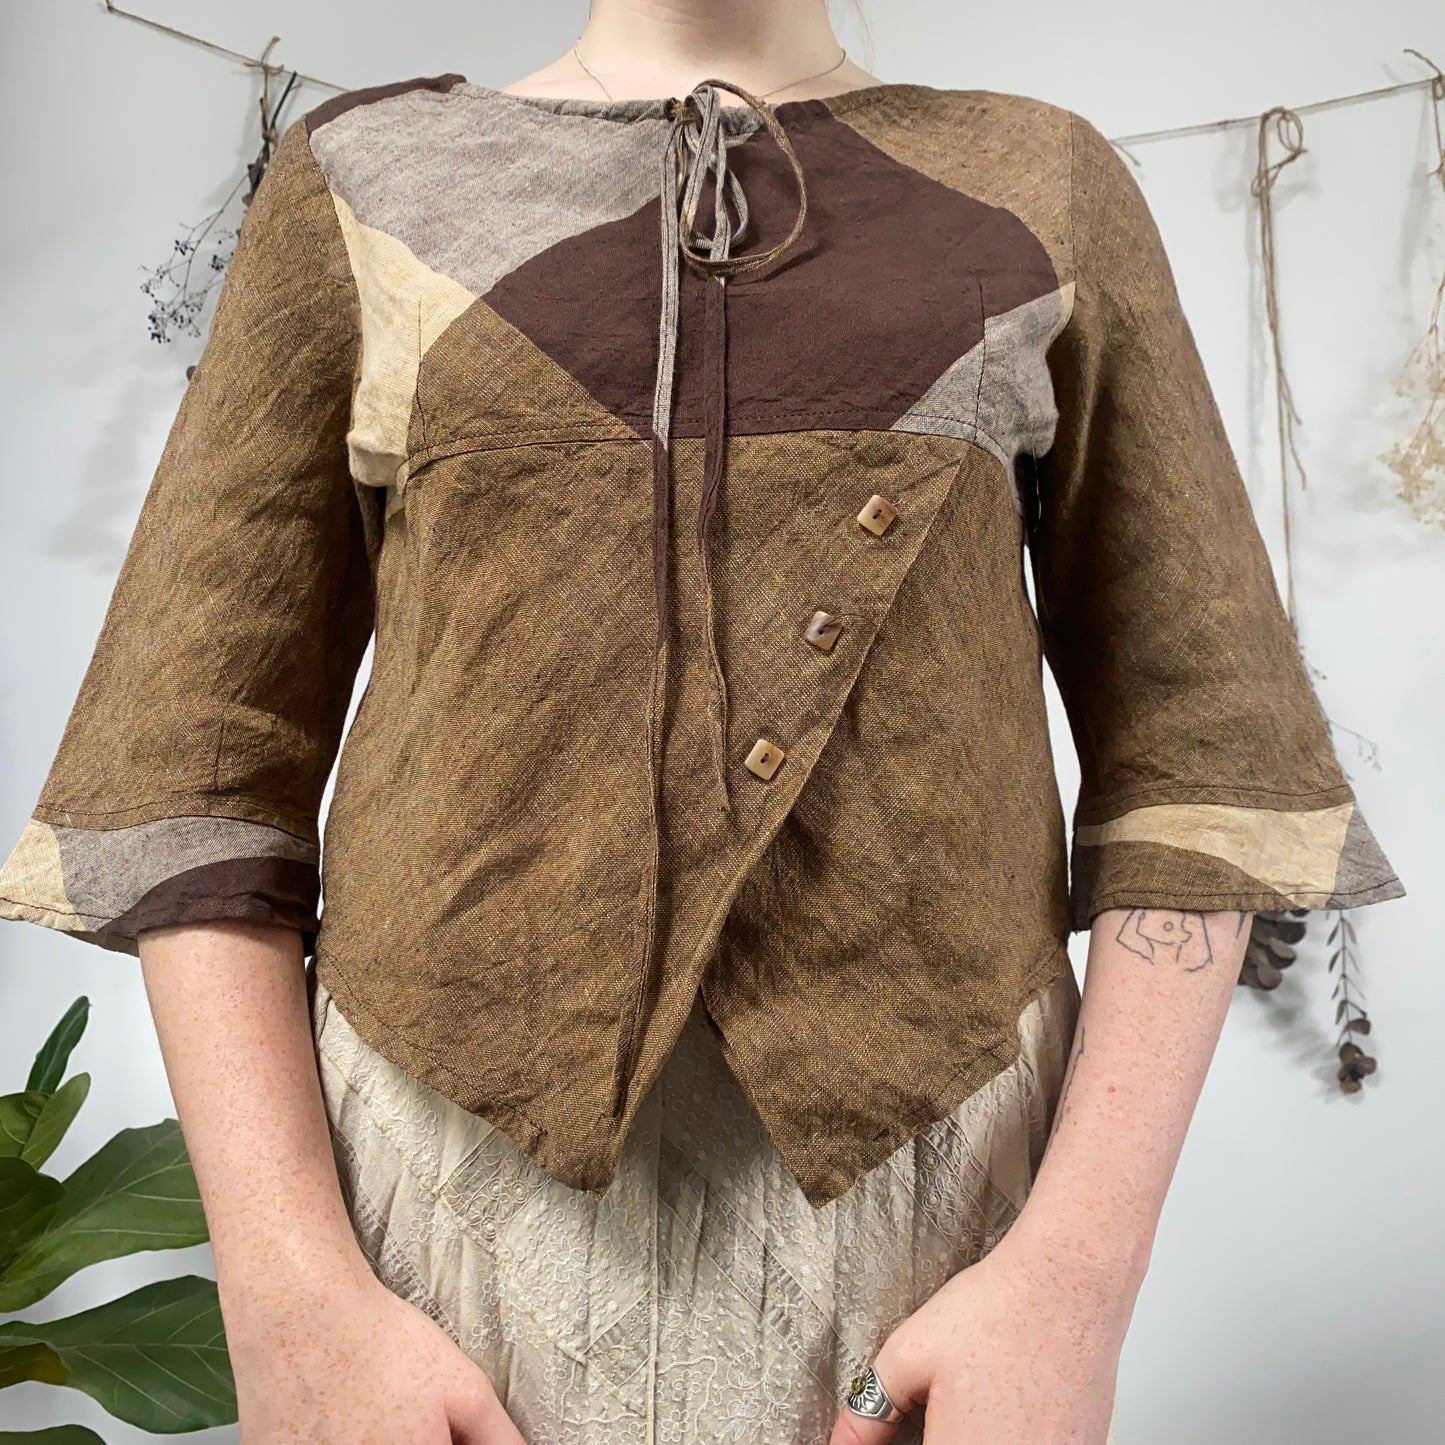 Earthy top - size S/M